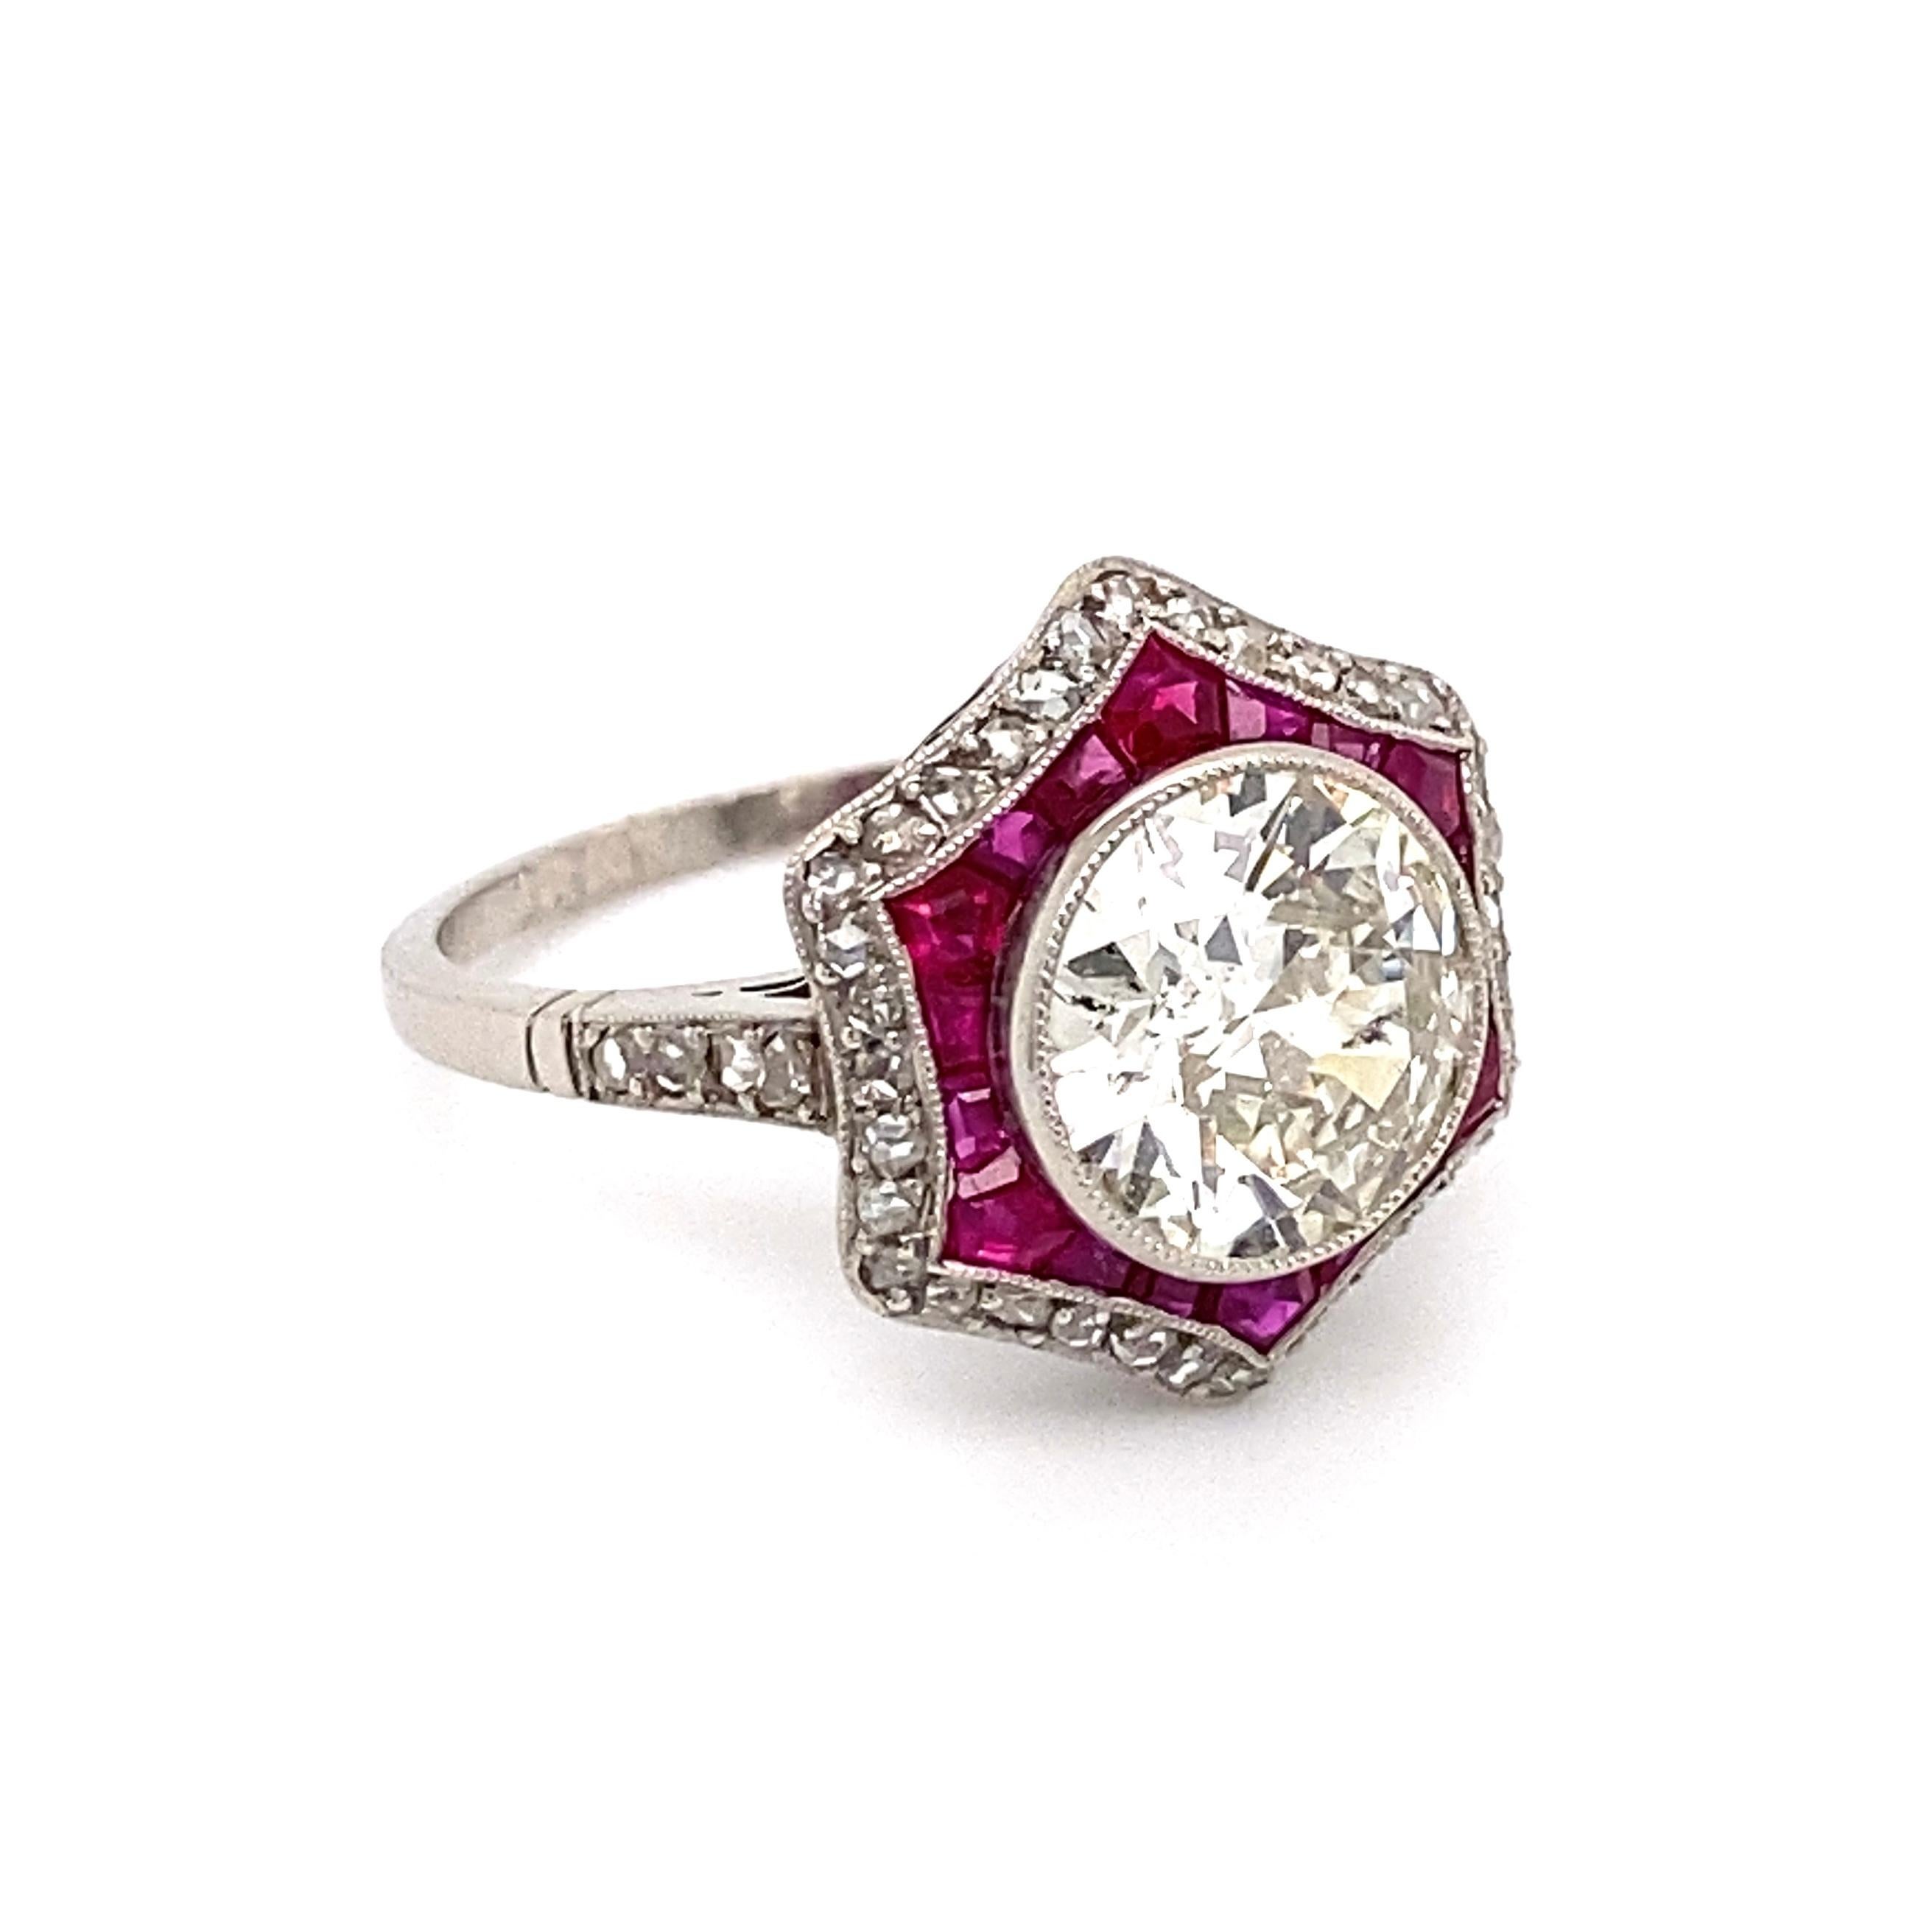 Simply Beautiful! Finely detailed Art Deco Revival Platinum Cocktail Ring, center securely nestled with an Old European Round Diamond, approx. 2.46 Carat, K color, SI2 clarity, surrounded by calibrated Rubies, approx. 1.00tcw and Diamonds, approx.